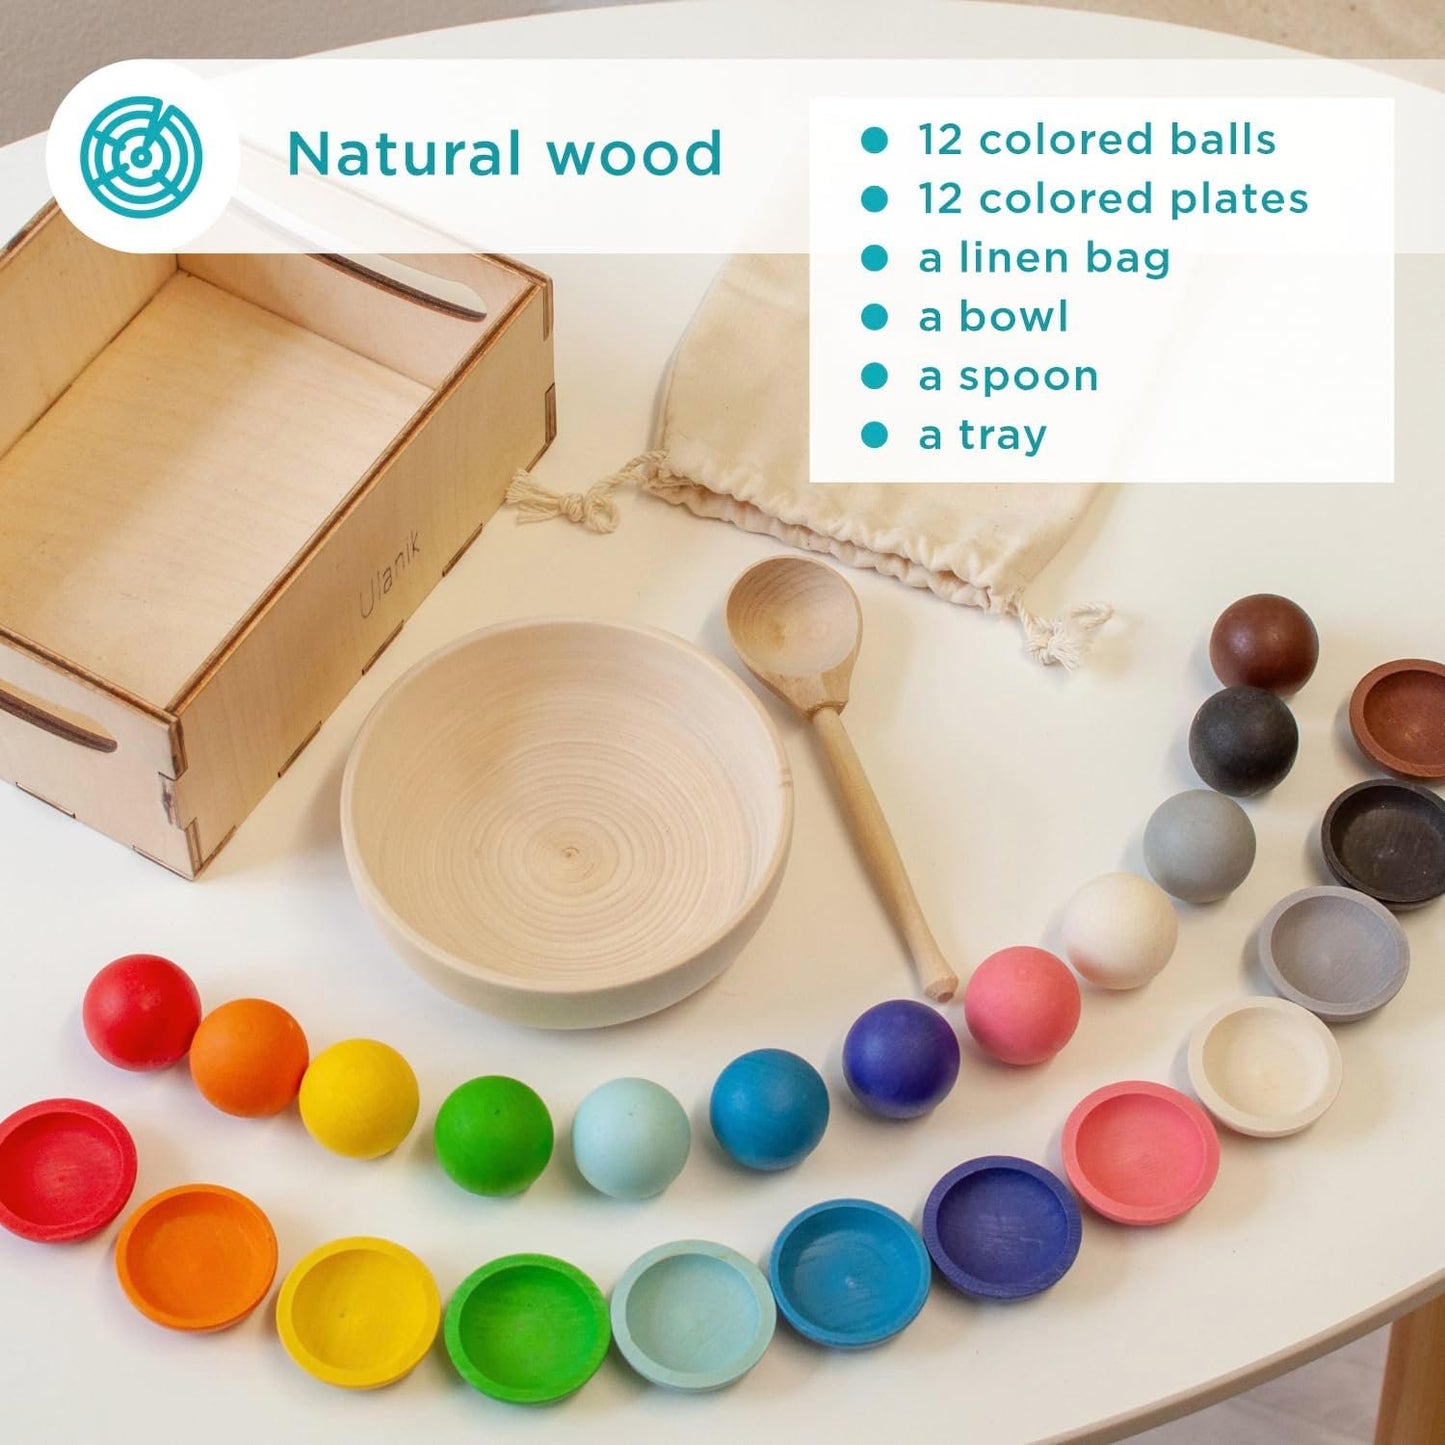 Ulanik Balls on Plates Toddler Montessori Toys for 1+ Wooden Matching Game for Learning Color Sorting and Counting